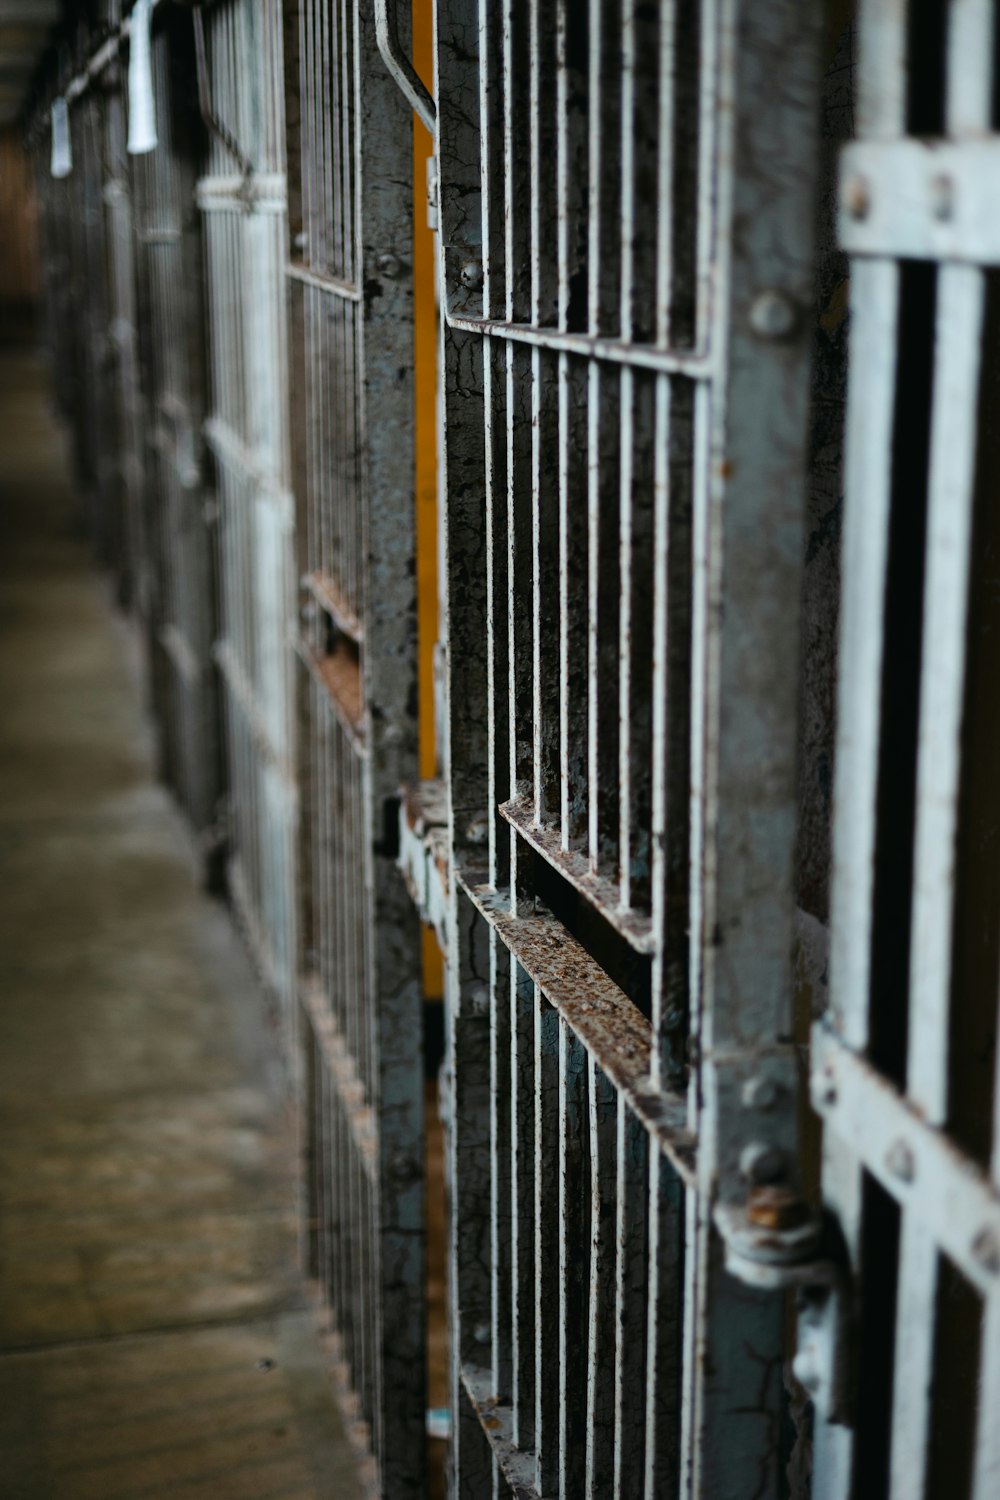 a close up of a jail cell with bars